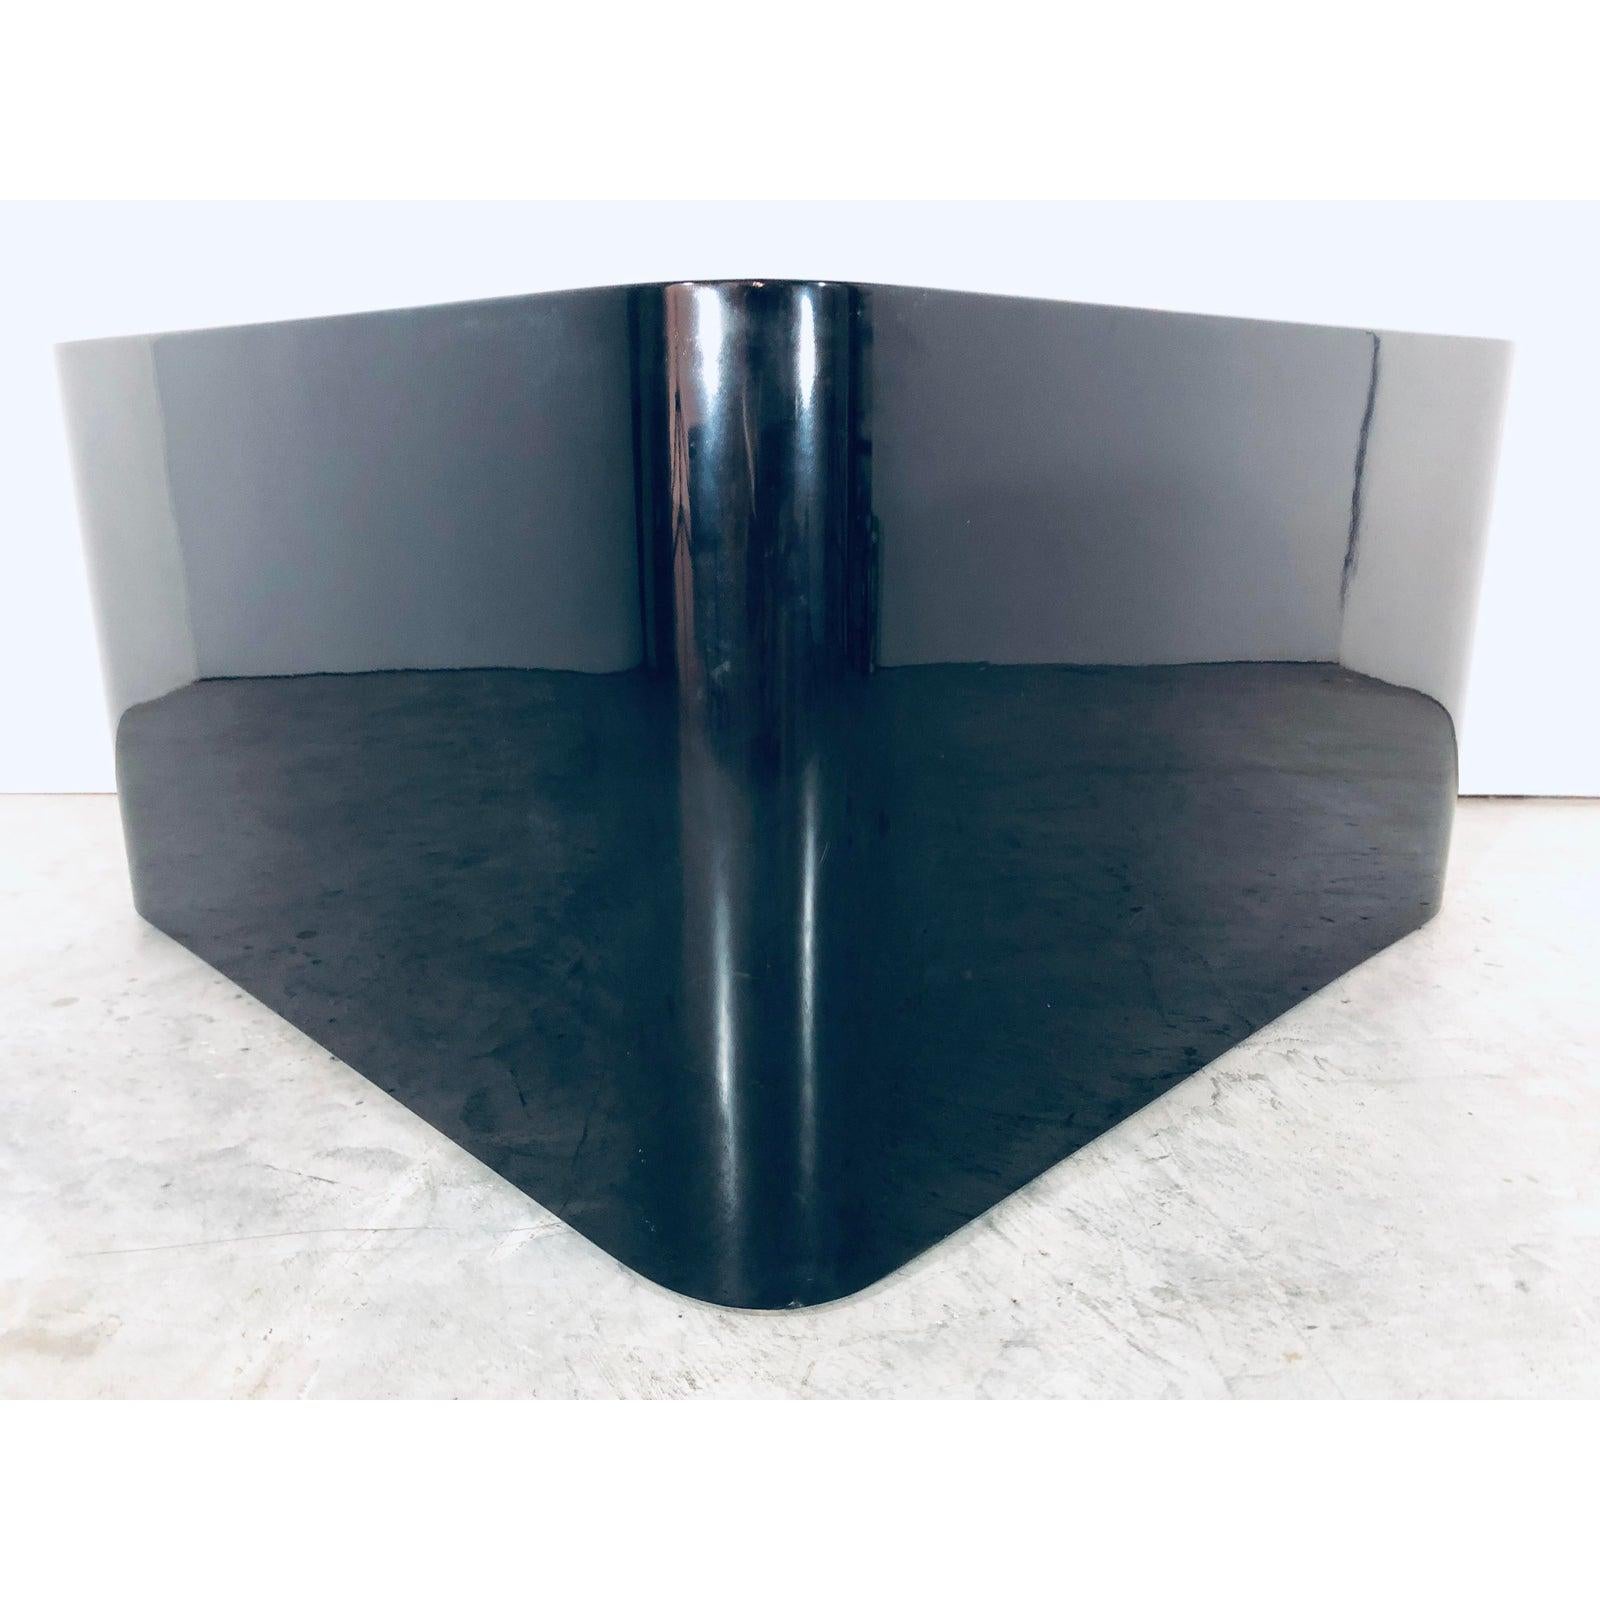 Paul Mayen for Intrex Black Lacquer Coffee Table 1